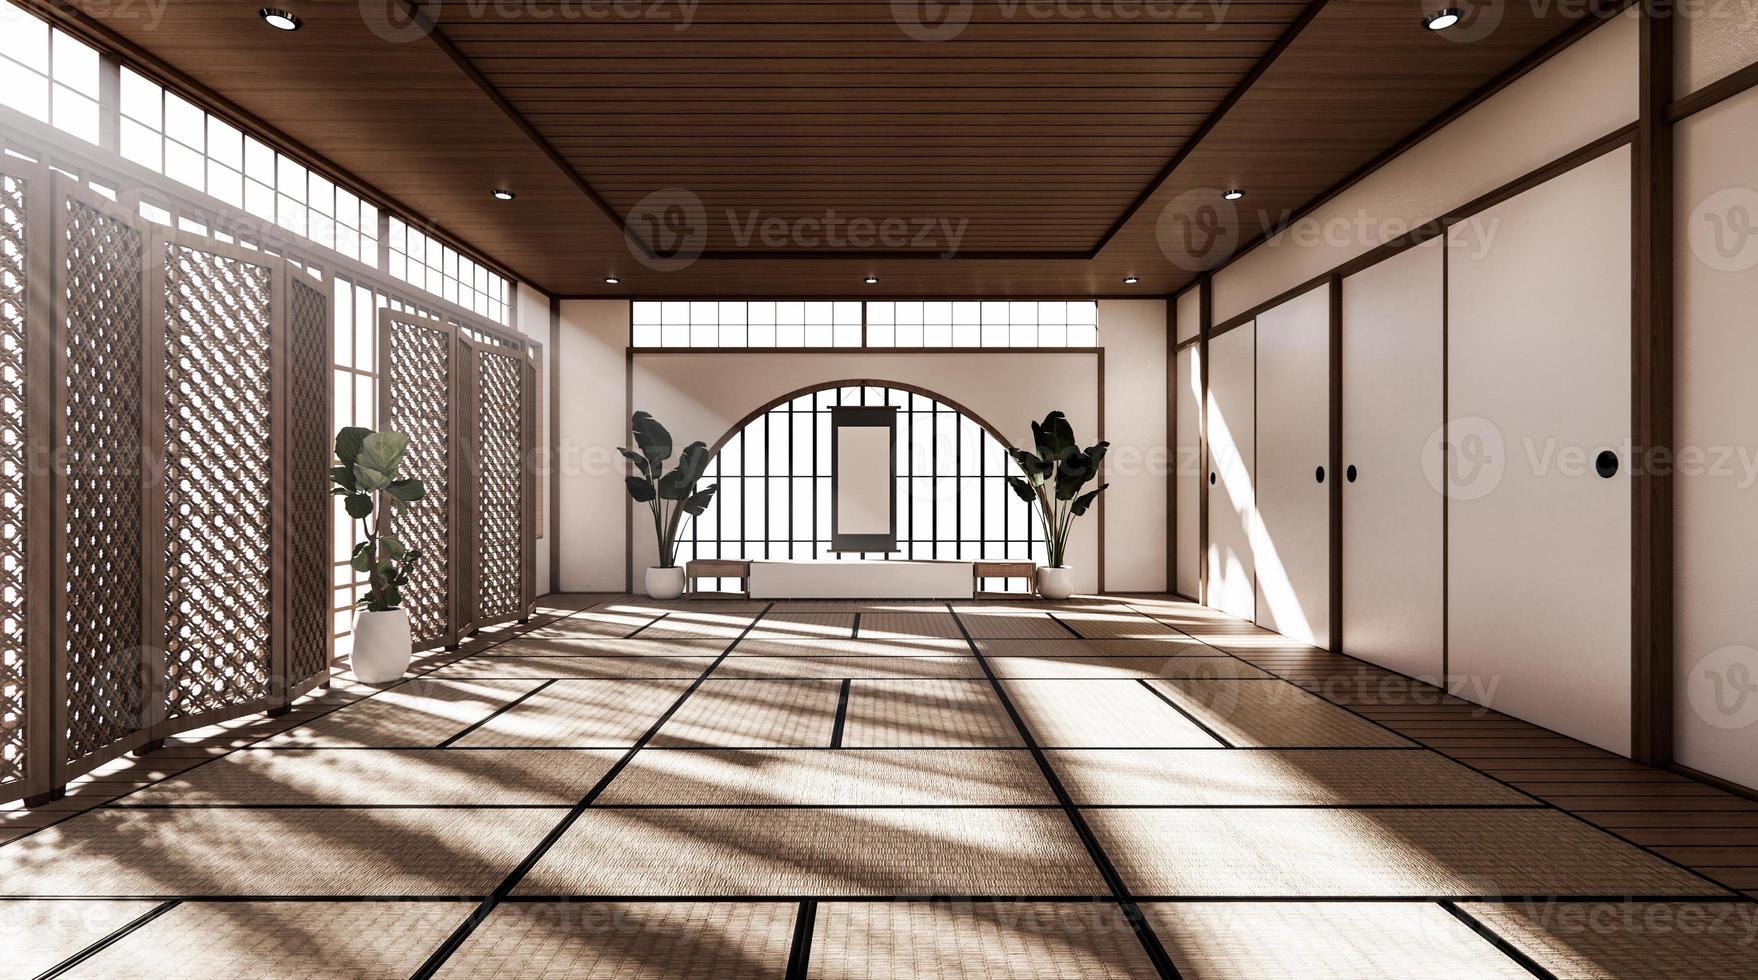 The room is spacious design of the Japanese style  And light in natural tones. 3D rendering photo